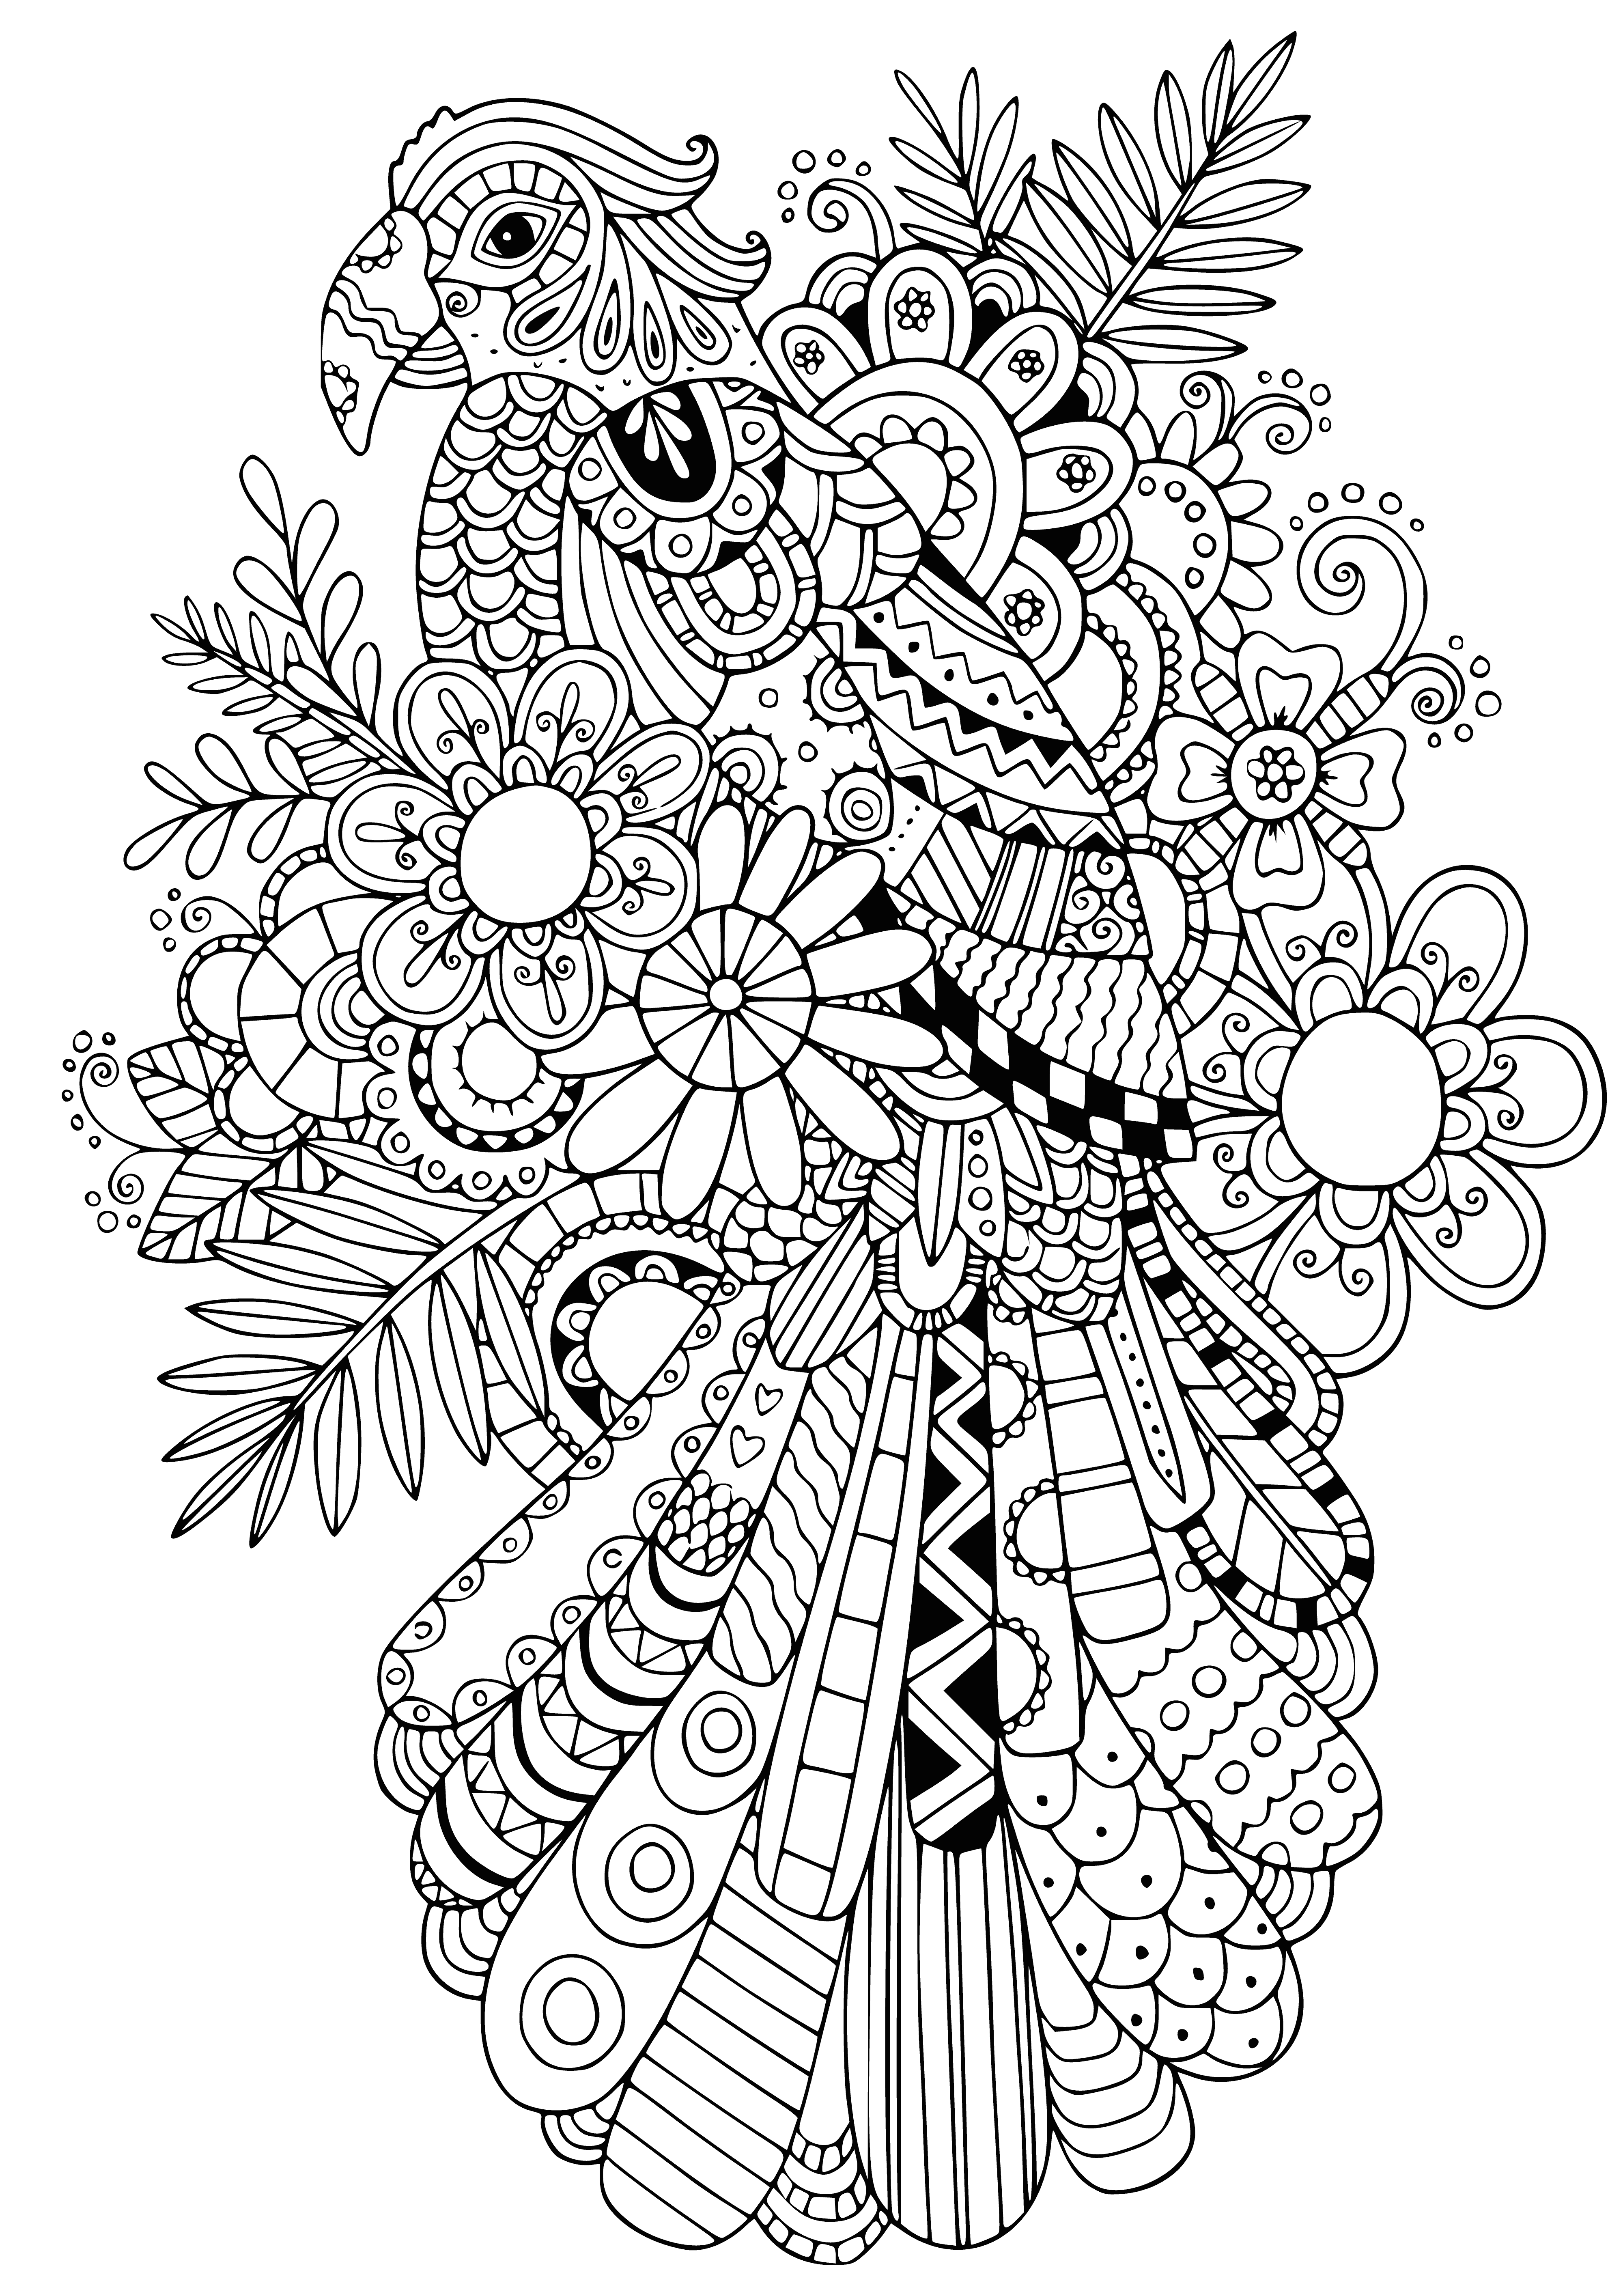 coloring page: A colorful bird with a curved beak and tail striped in blue and yellow perches on a tree, its feathers green, blue, and yellow, eyes orange.